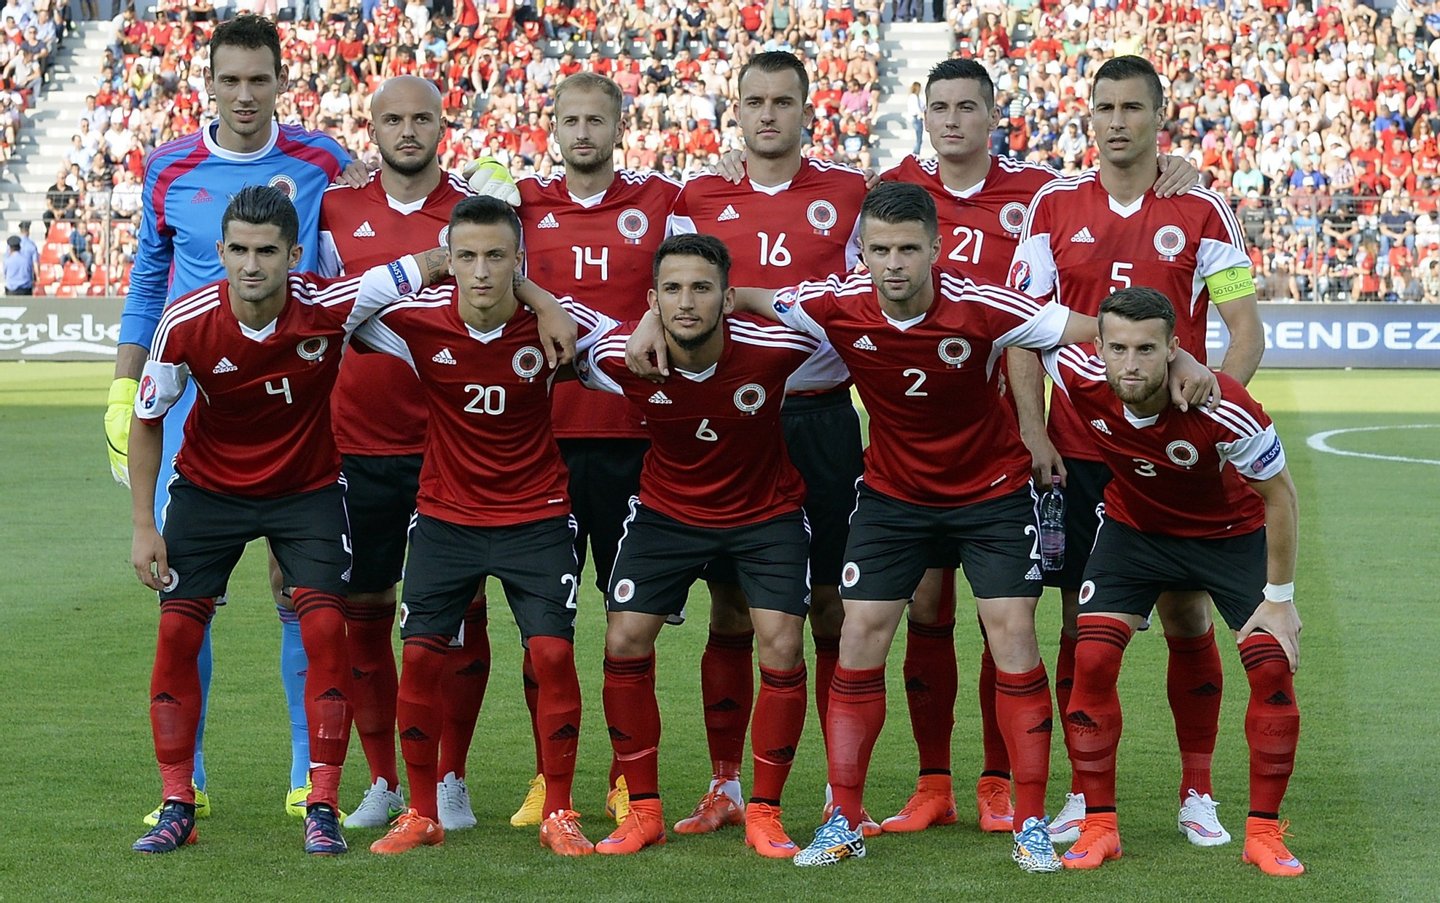 (FromL, 1st row) Albania's midfielder Elseid Hysaj, Albania's Ergys Kace, Albania's midfielder Naser Aliji, Albania's defender Andi Lila, Albania's defender Ermir Lenjani, (FromL, second row) Albania's goalkeeper Etrit Berisha, Albania's midfielder Arlind Ajeti, Albania's Migjen Basha, Albania's Sokol Cikalleshi, Albania's Odise Roshi, and Albania's midfielder Lorik Cana pose prior to a friendly football match Albania vs France on June 13, 2015 in Elbasan, outside Tirana. AFP PHOTO / LOIC VENANCE (Photo credit should read LOIC VENANCE/AFP/Getty Images)